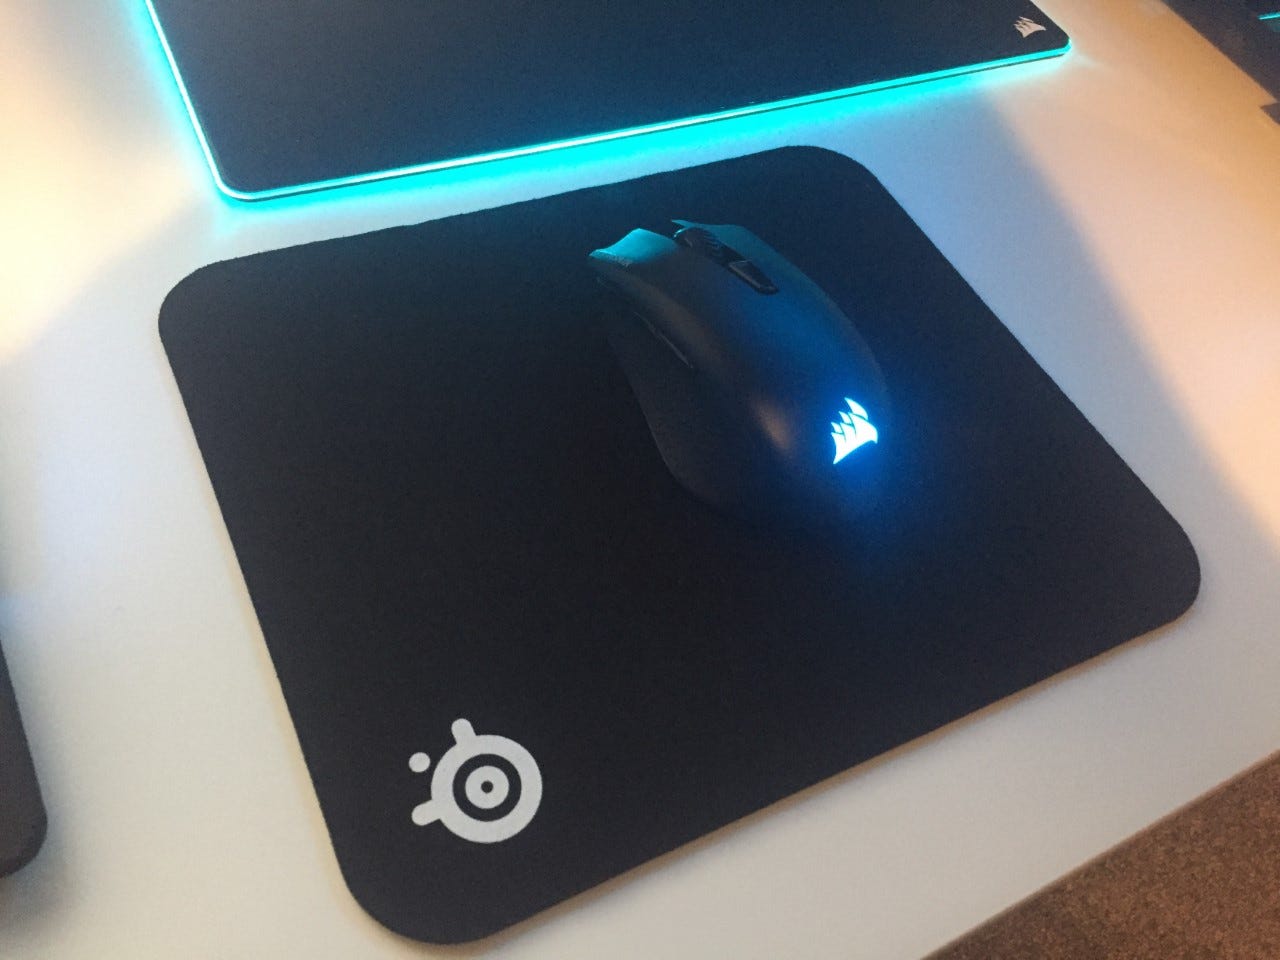 SteelSeries QcK Small Review. My mum needed a mousepad for work